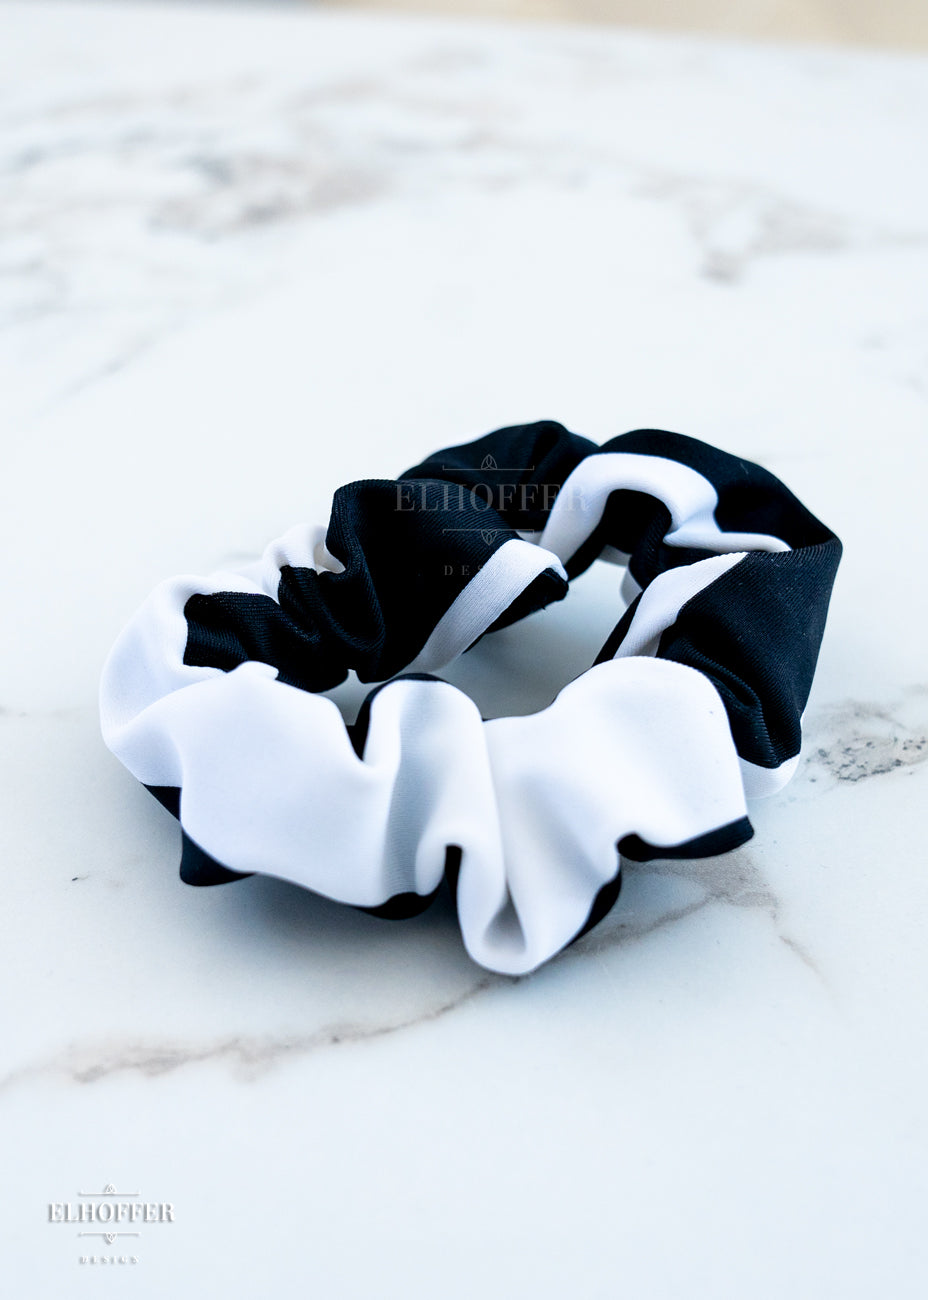 A black and white striped scrunchie laying on a white marbled background.